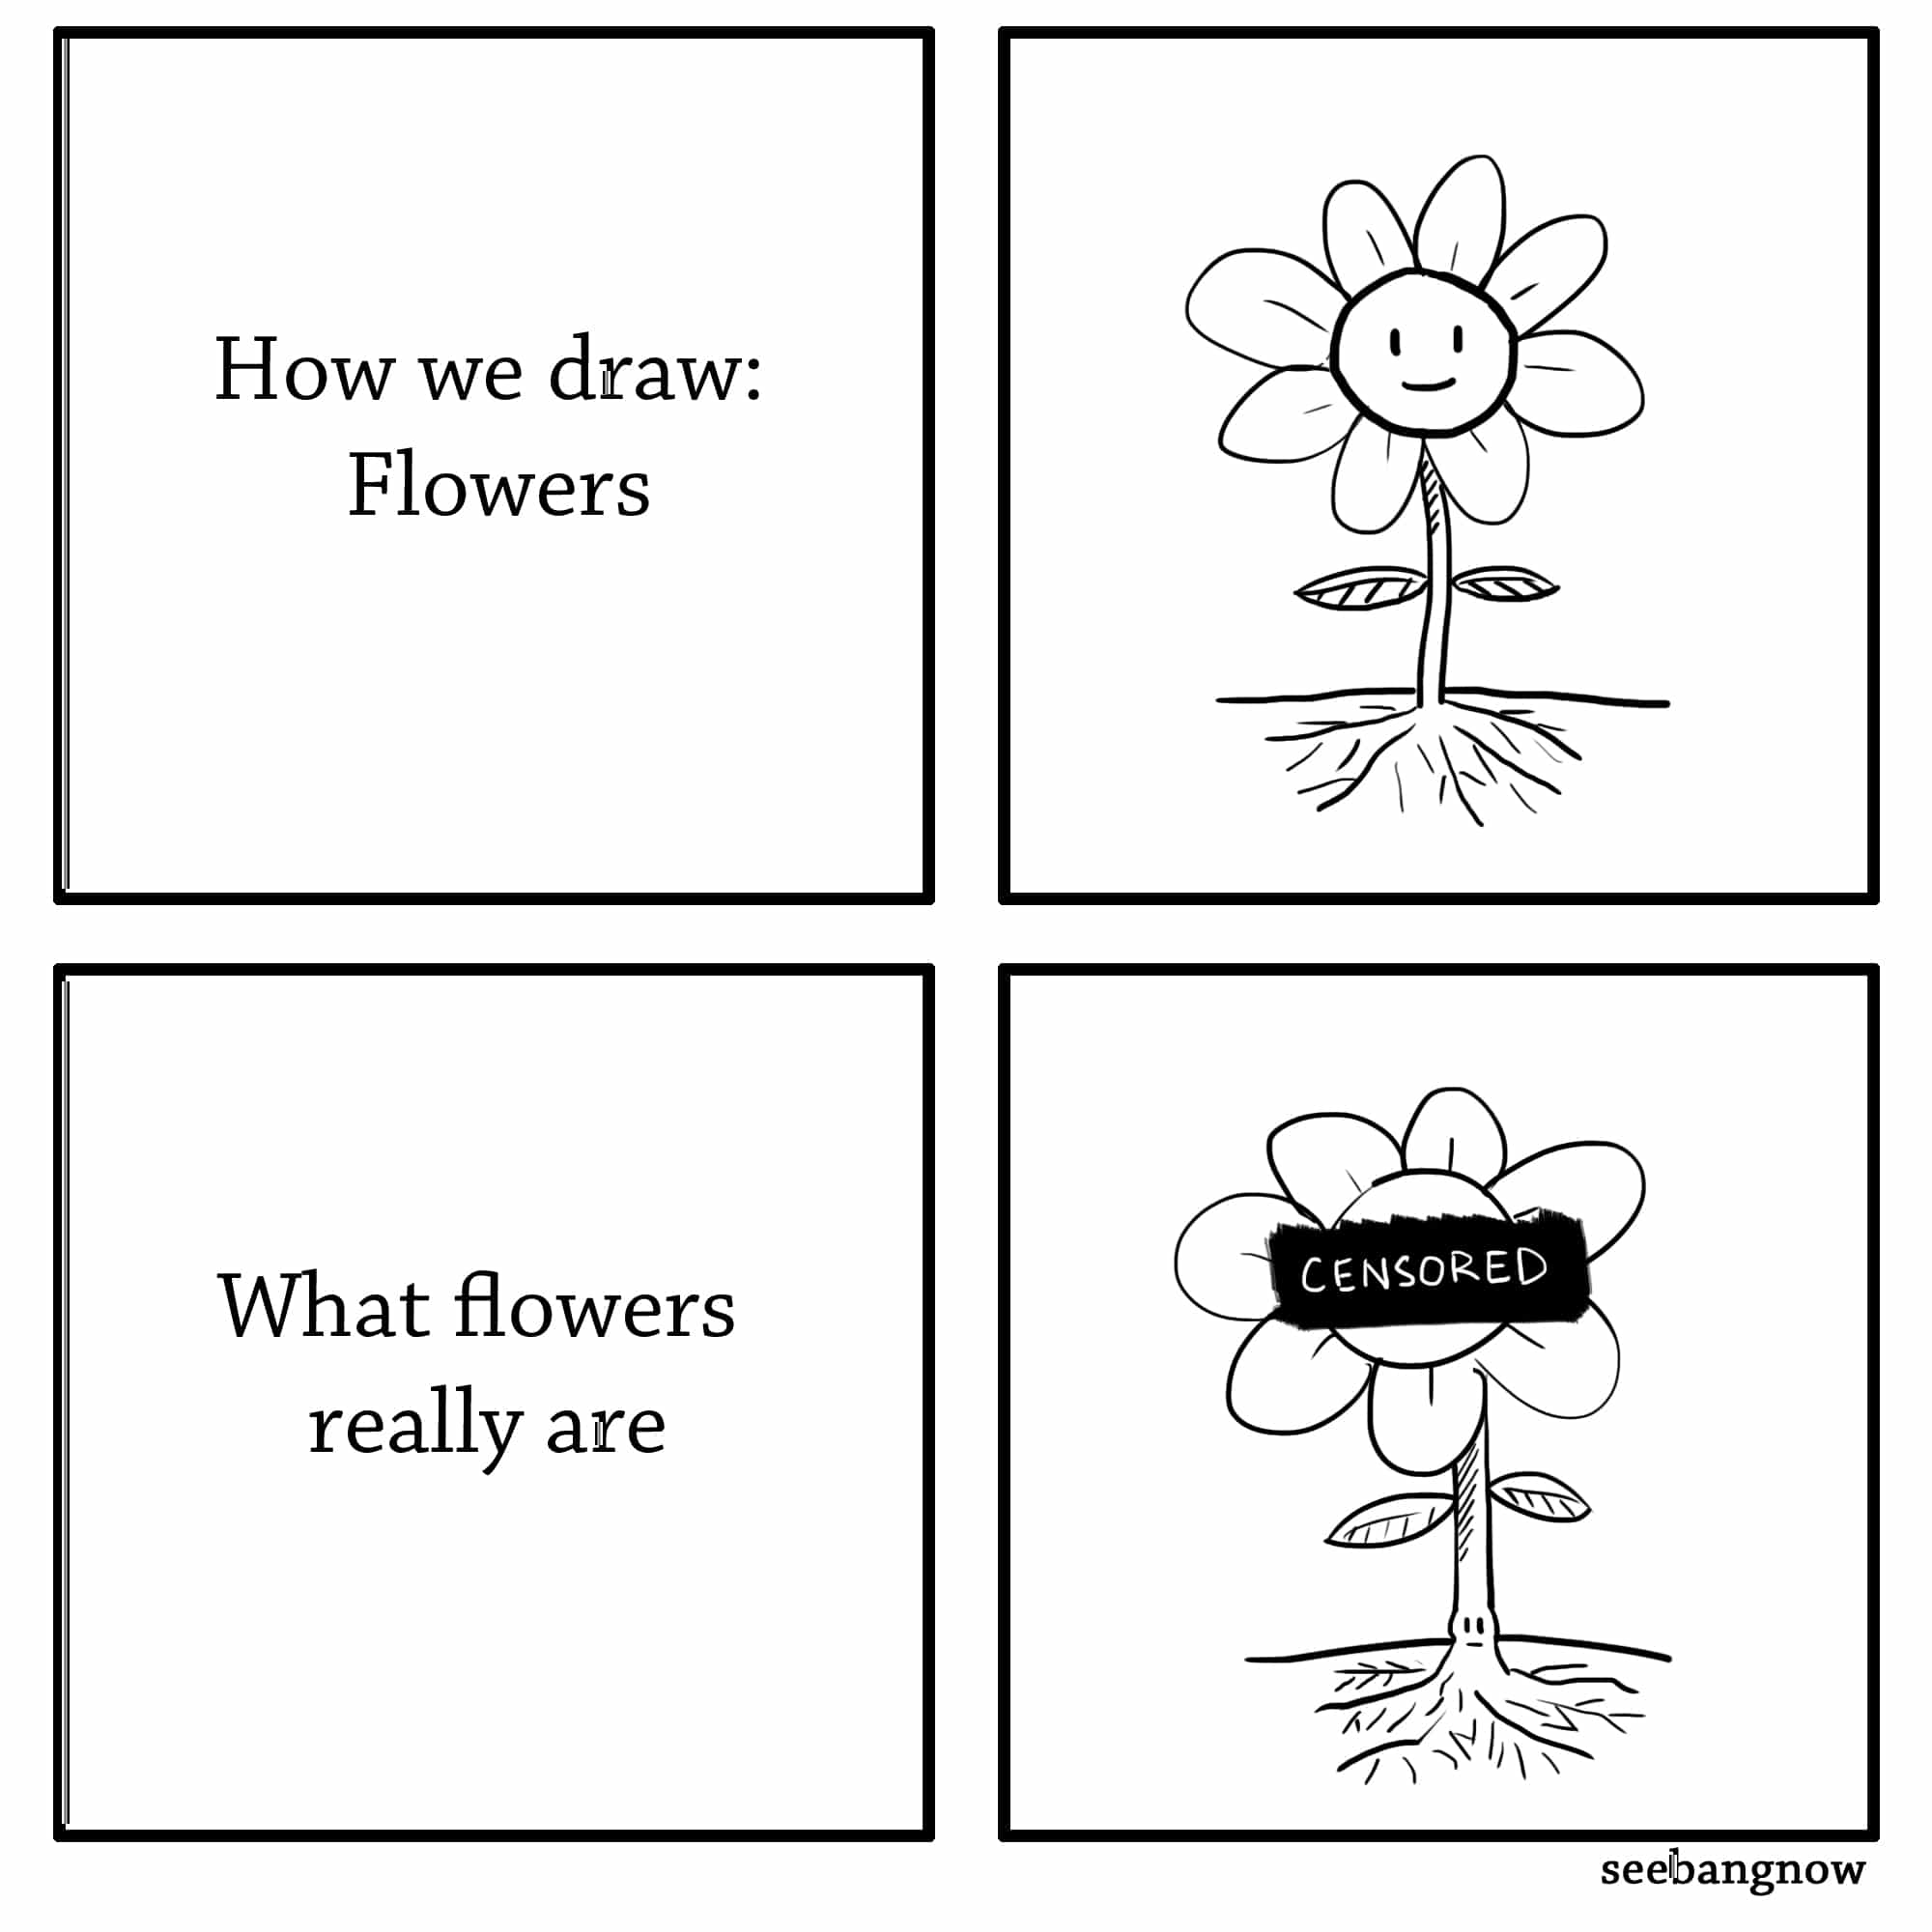 comics comics comics text: How we draw: Flowers What flowers really are CENSORED seebangnow 